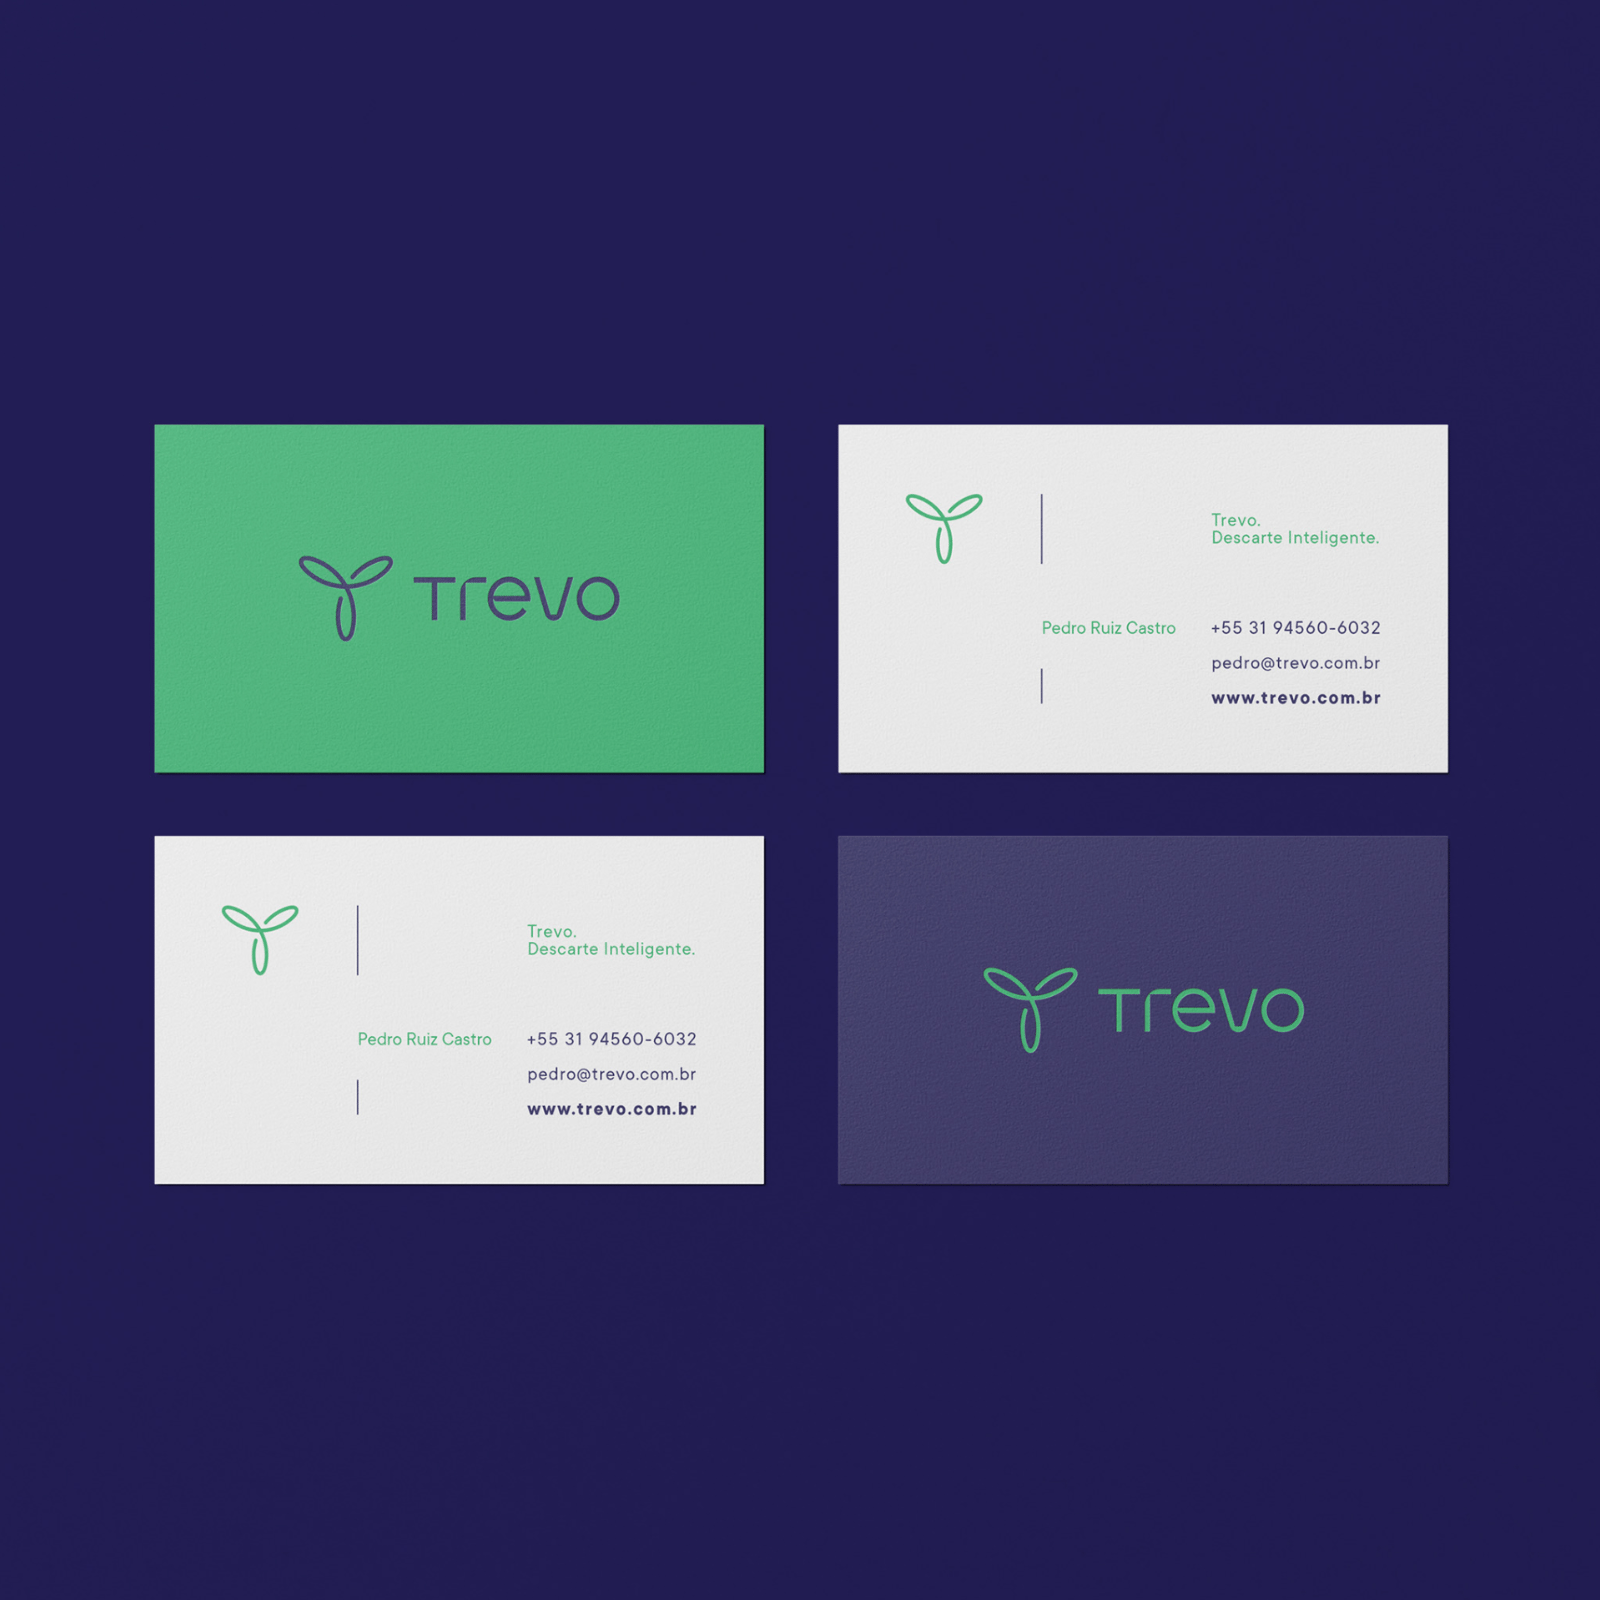 Branding and Visual Identity for Trevo Resduos